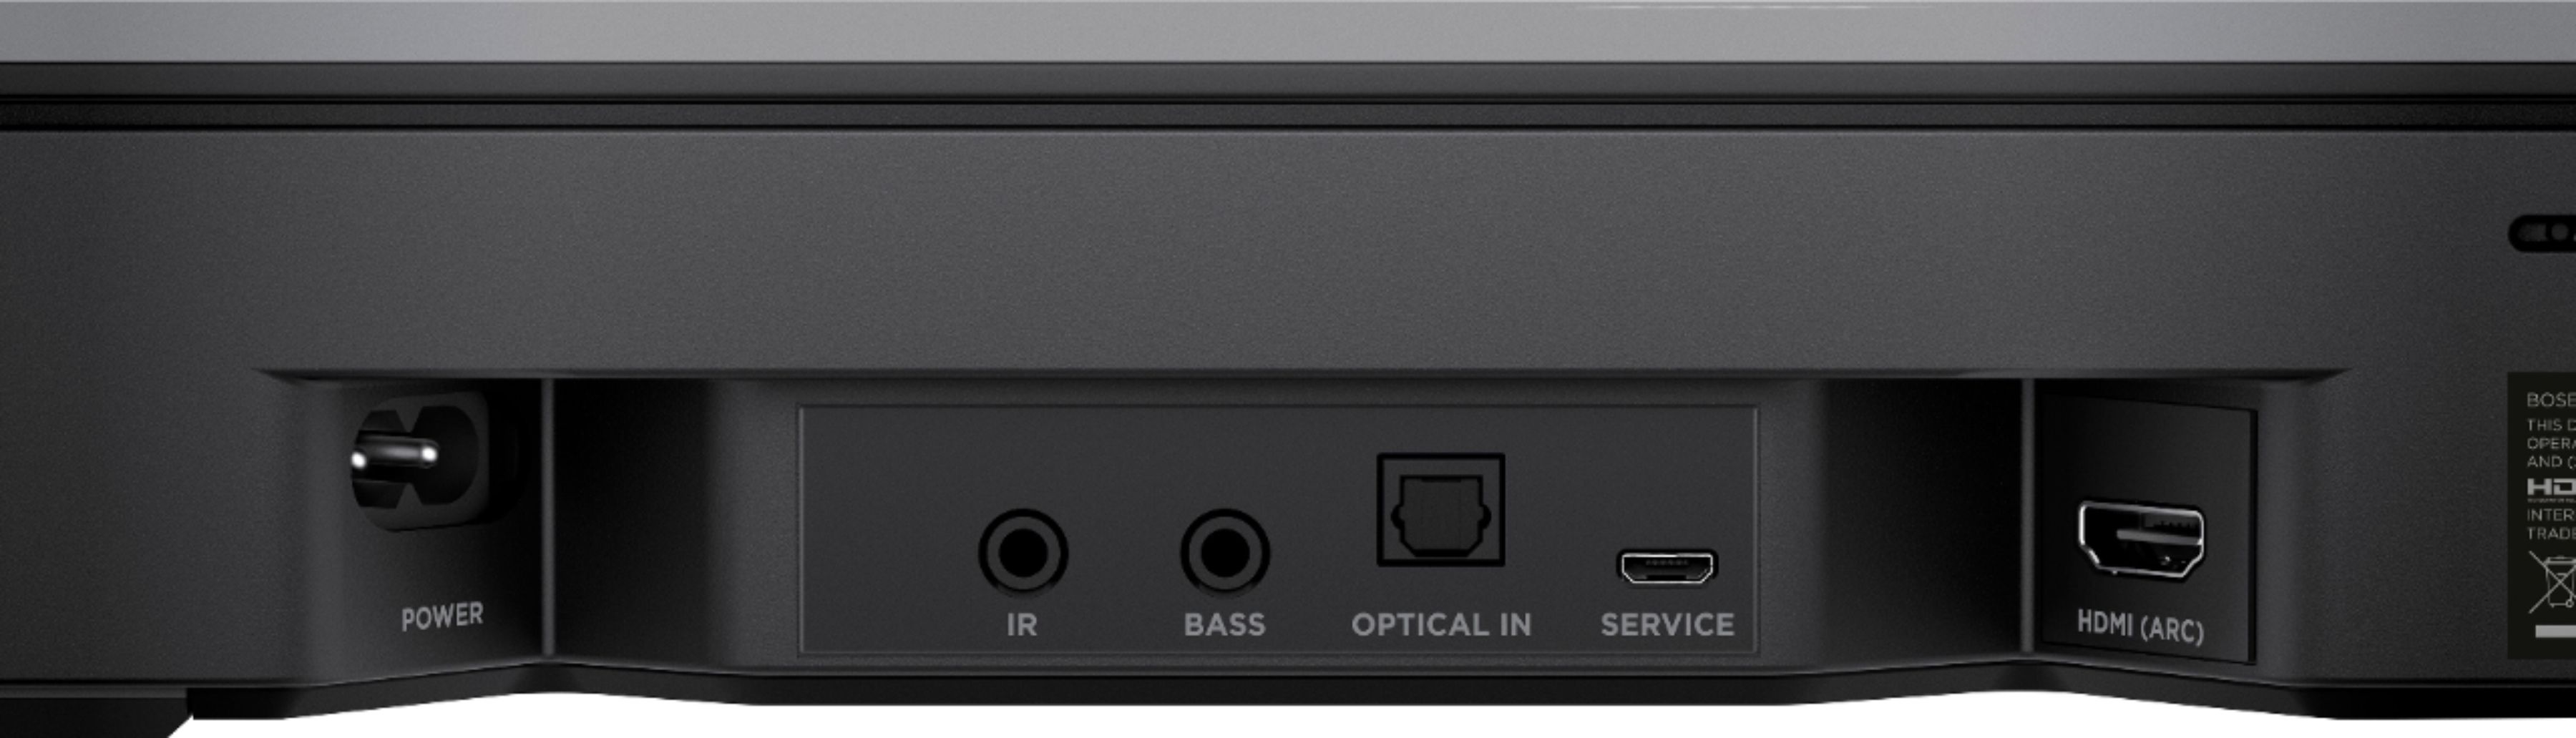 Back View: Swann - 8 Channel 2TB NVR, 4 x 4K PoE Cameras, w/Dual LED Spotlights, Color Night Vision & Free Face Detection - Black/White